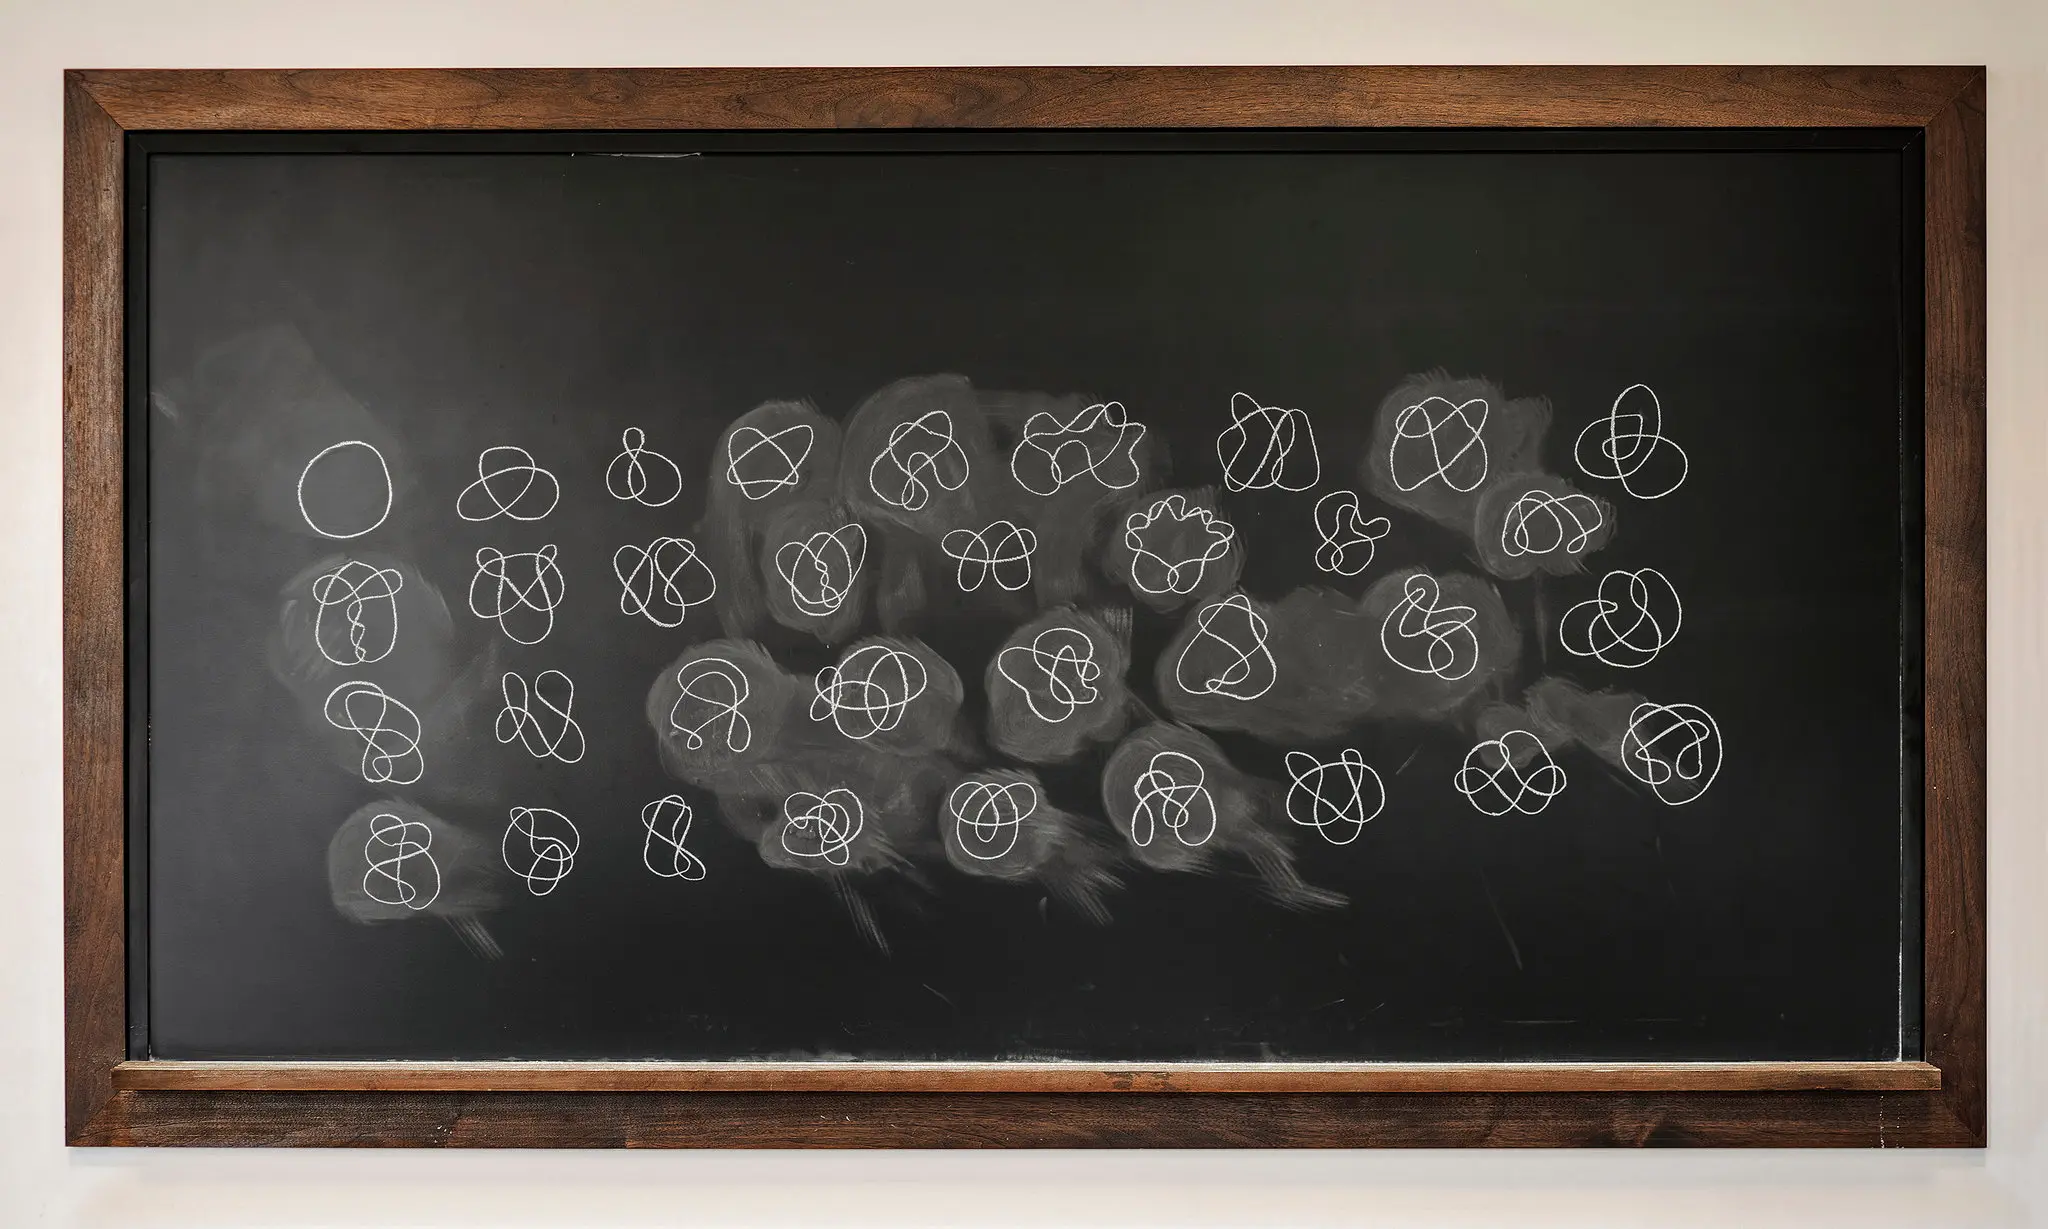 Chalkboard with squiggles written on it.